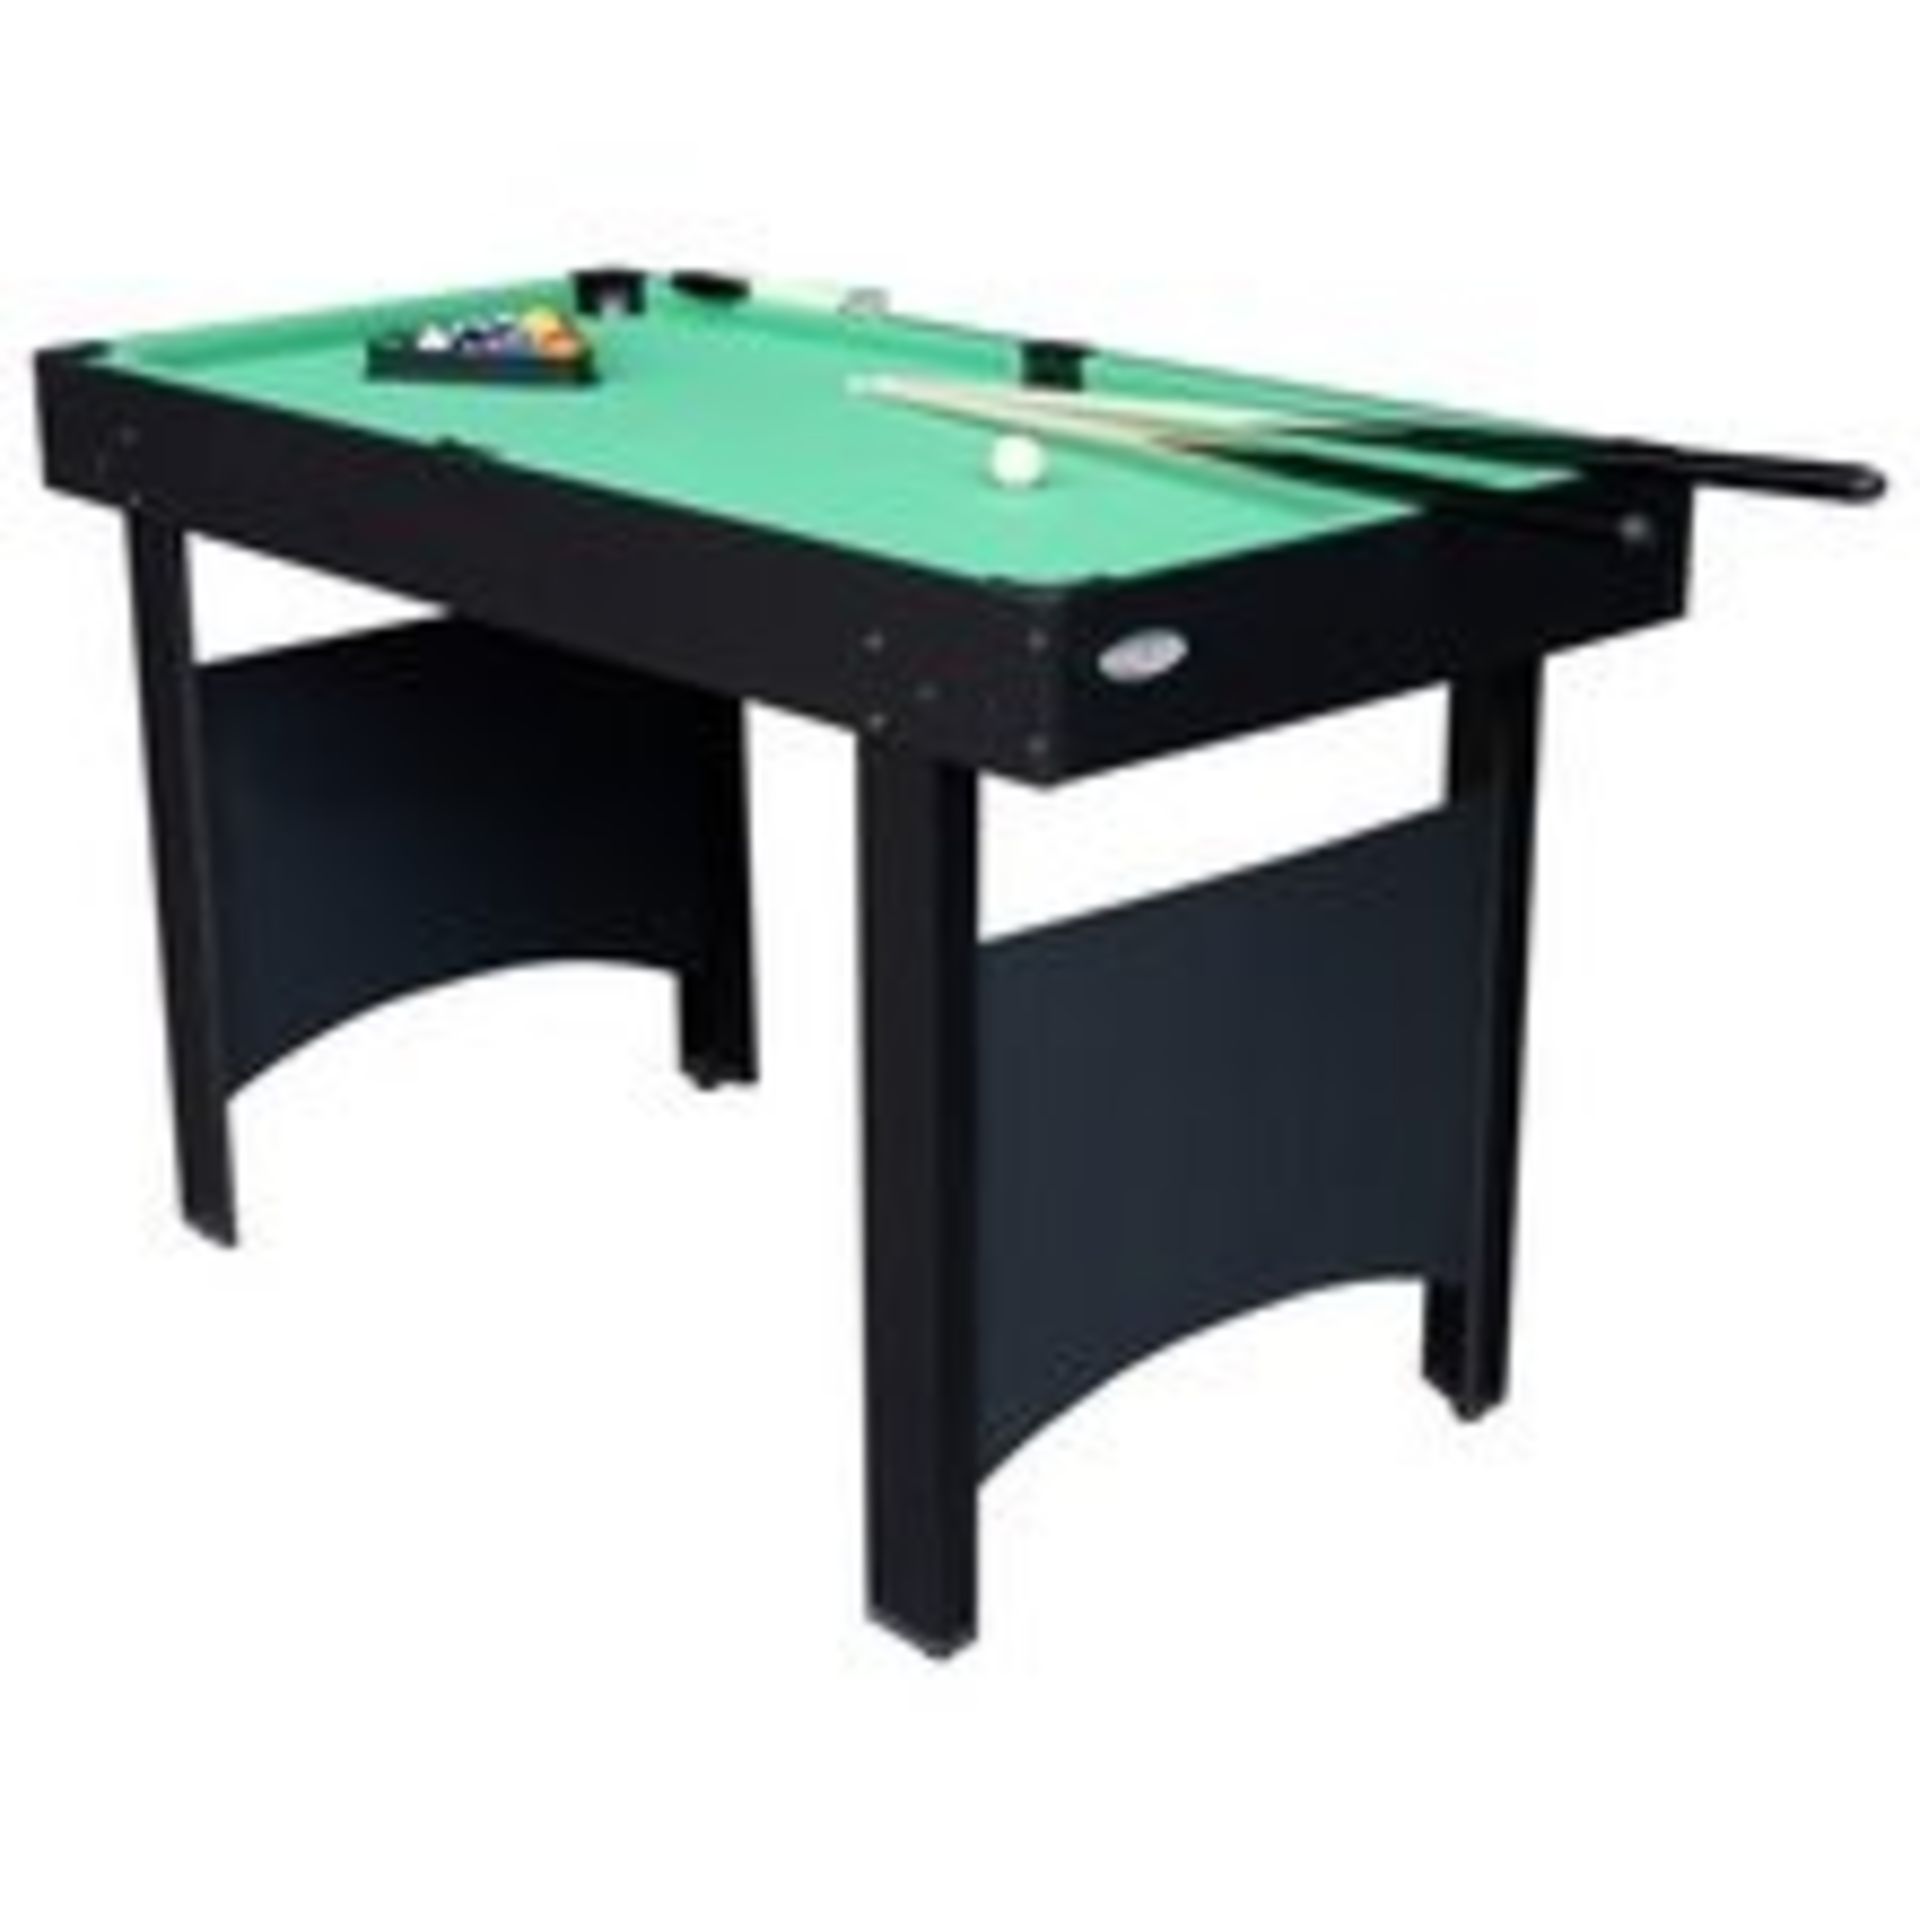 1 BRAND NEW BOXED 5FT POOL TABLE 6EHTW